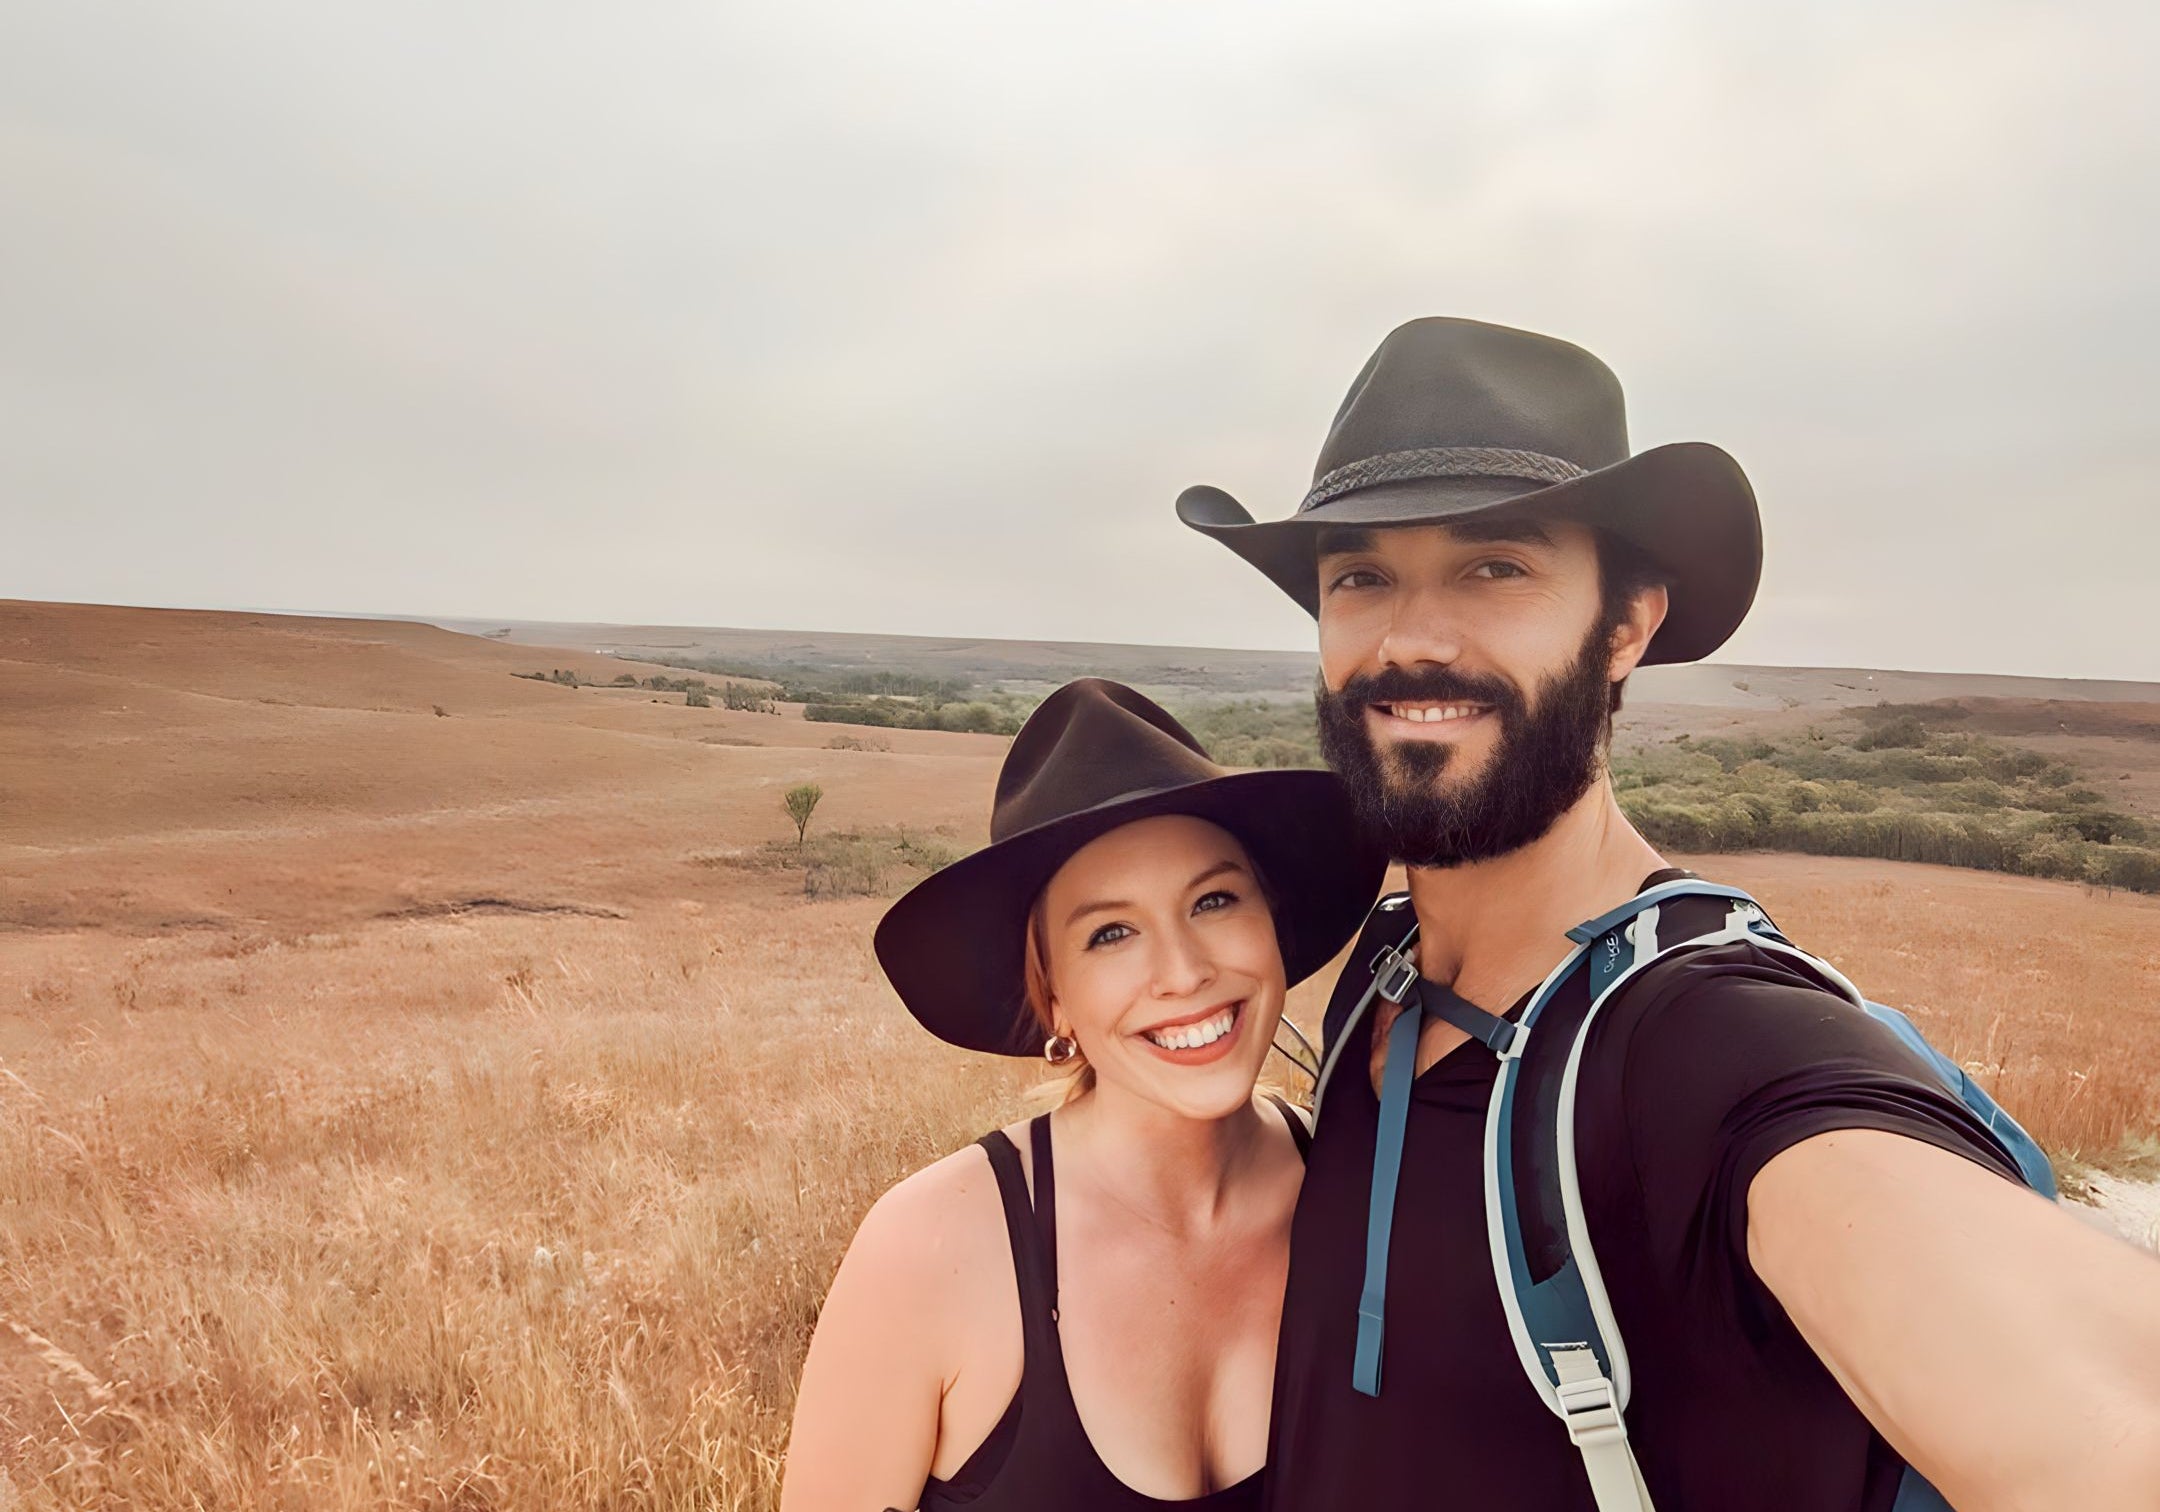 Selfie of a joyful couple celebrating the Great Outdoors, both wearing their Agnoulita Hats.